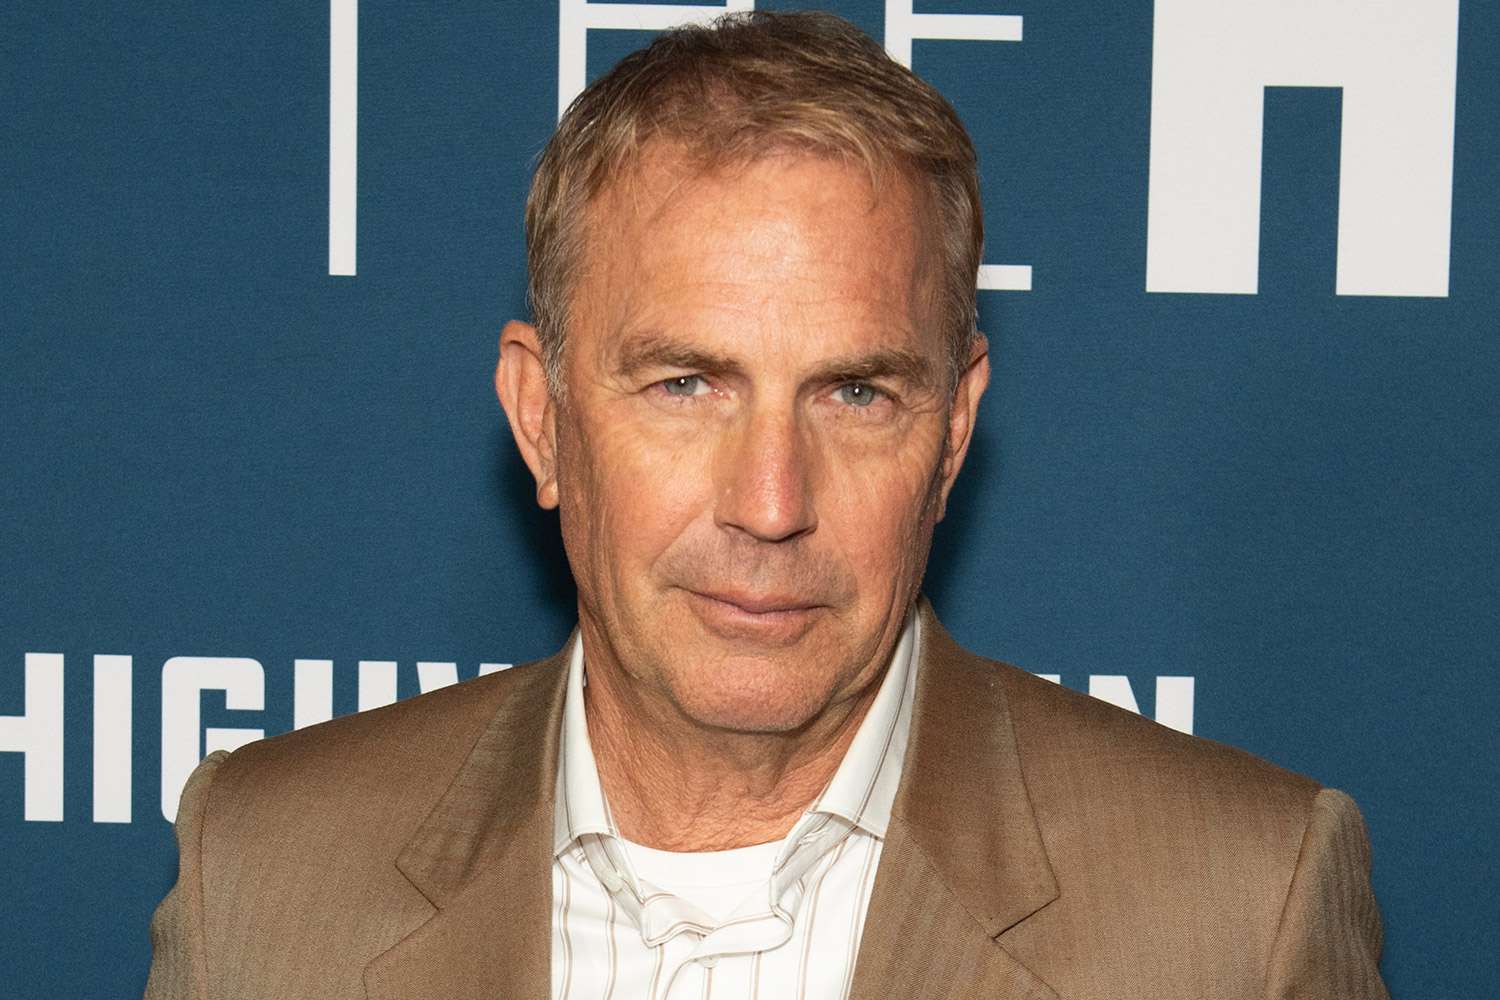 Kevin Costner Ex-wife Accuses Him Of Being 'Evasive' About His Finances During Nasty Divorce